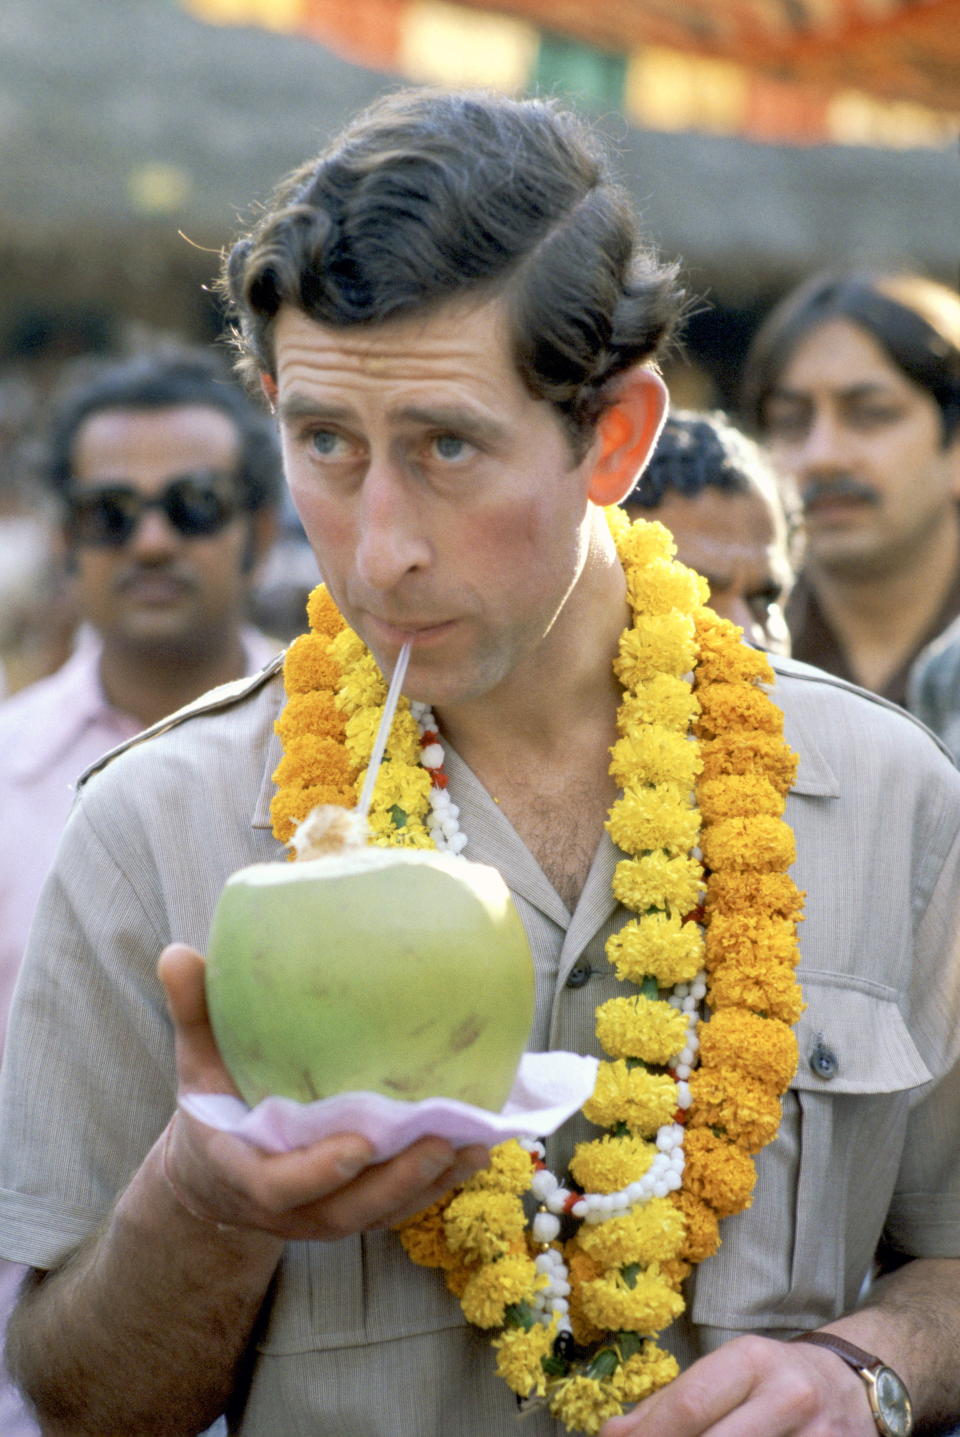 One Coconut for the Prince!